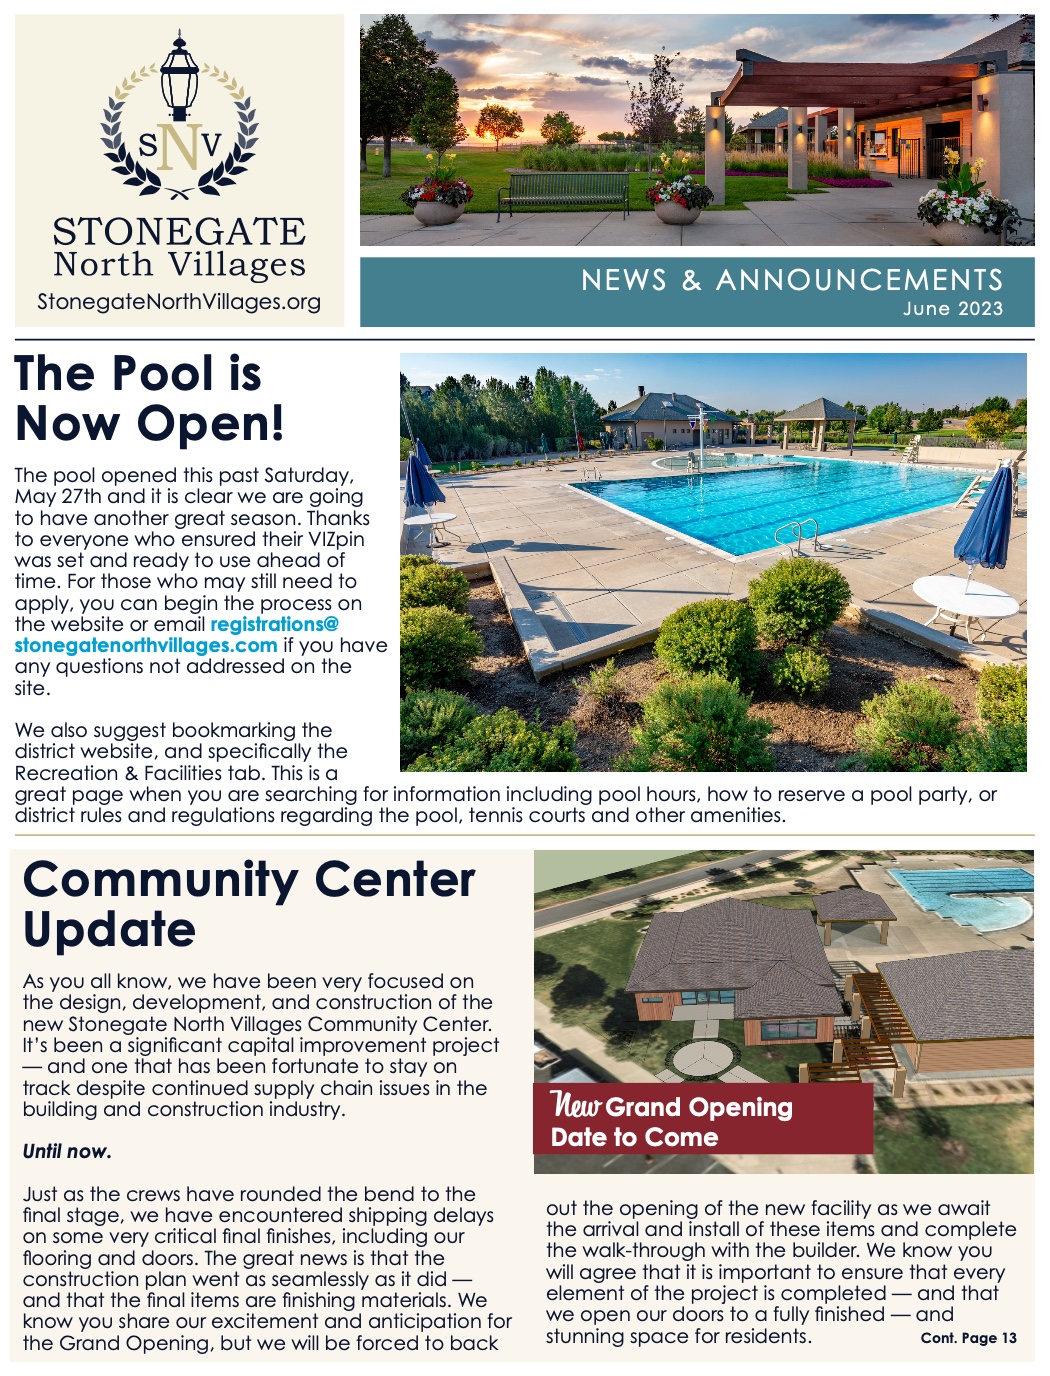 Newsletter cover with image of district pool and architectural rendering of Community Center